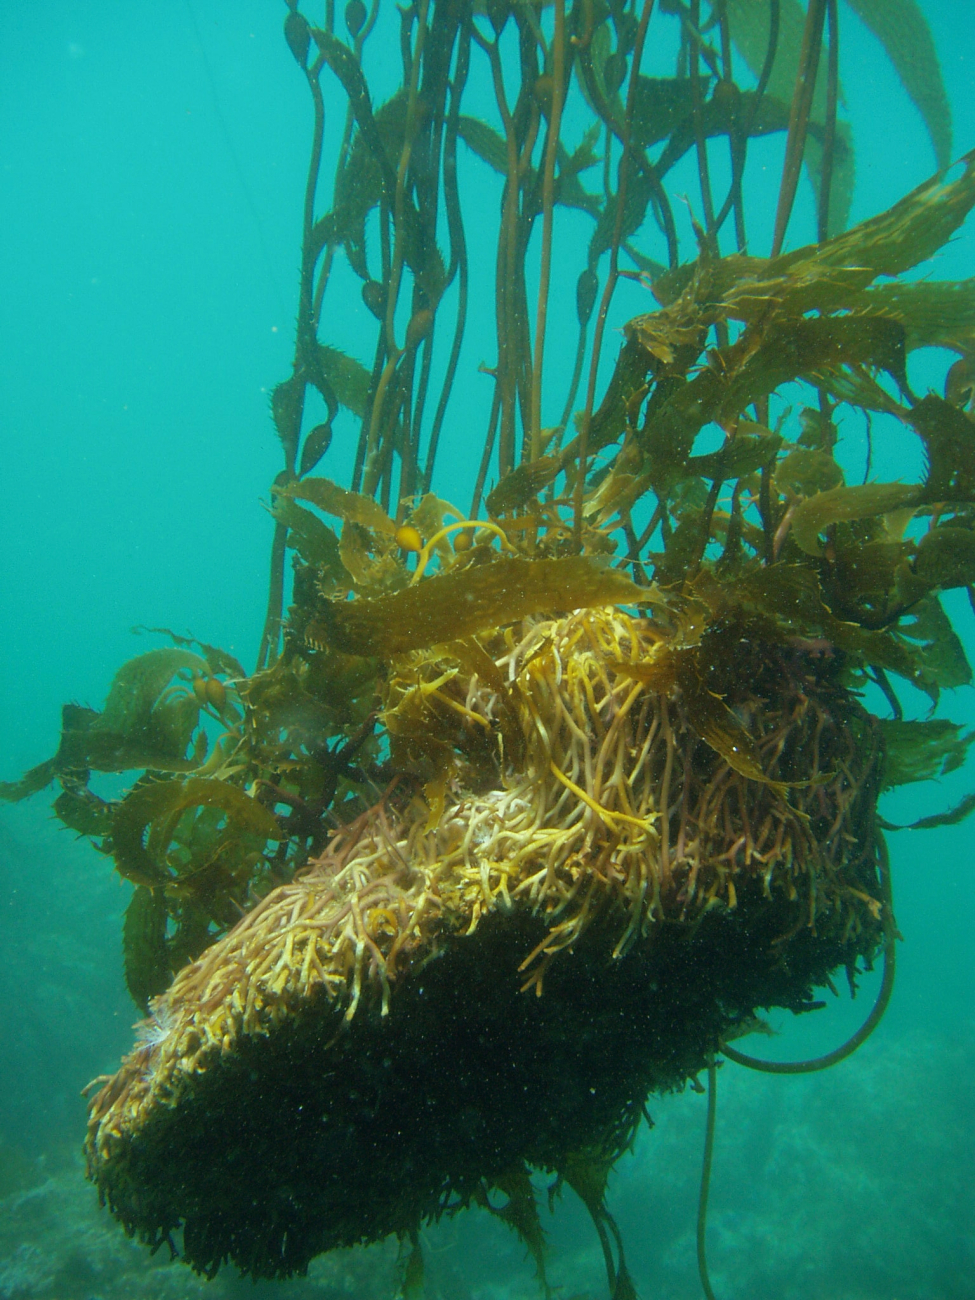 Giant kelp (Macrocystis pyrifera) holdfast torn from the bottom by a storm